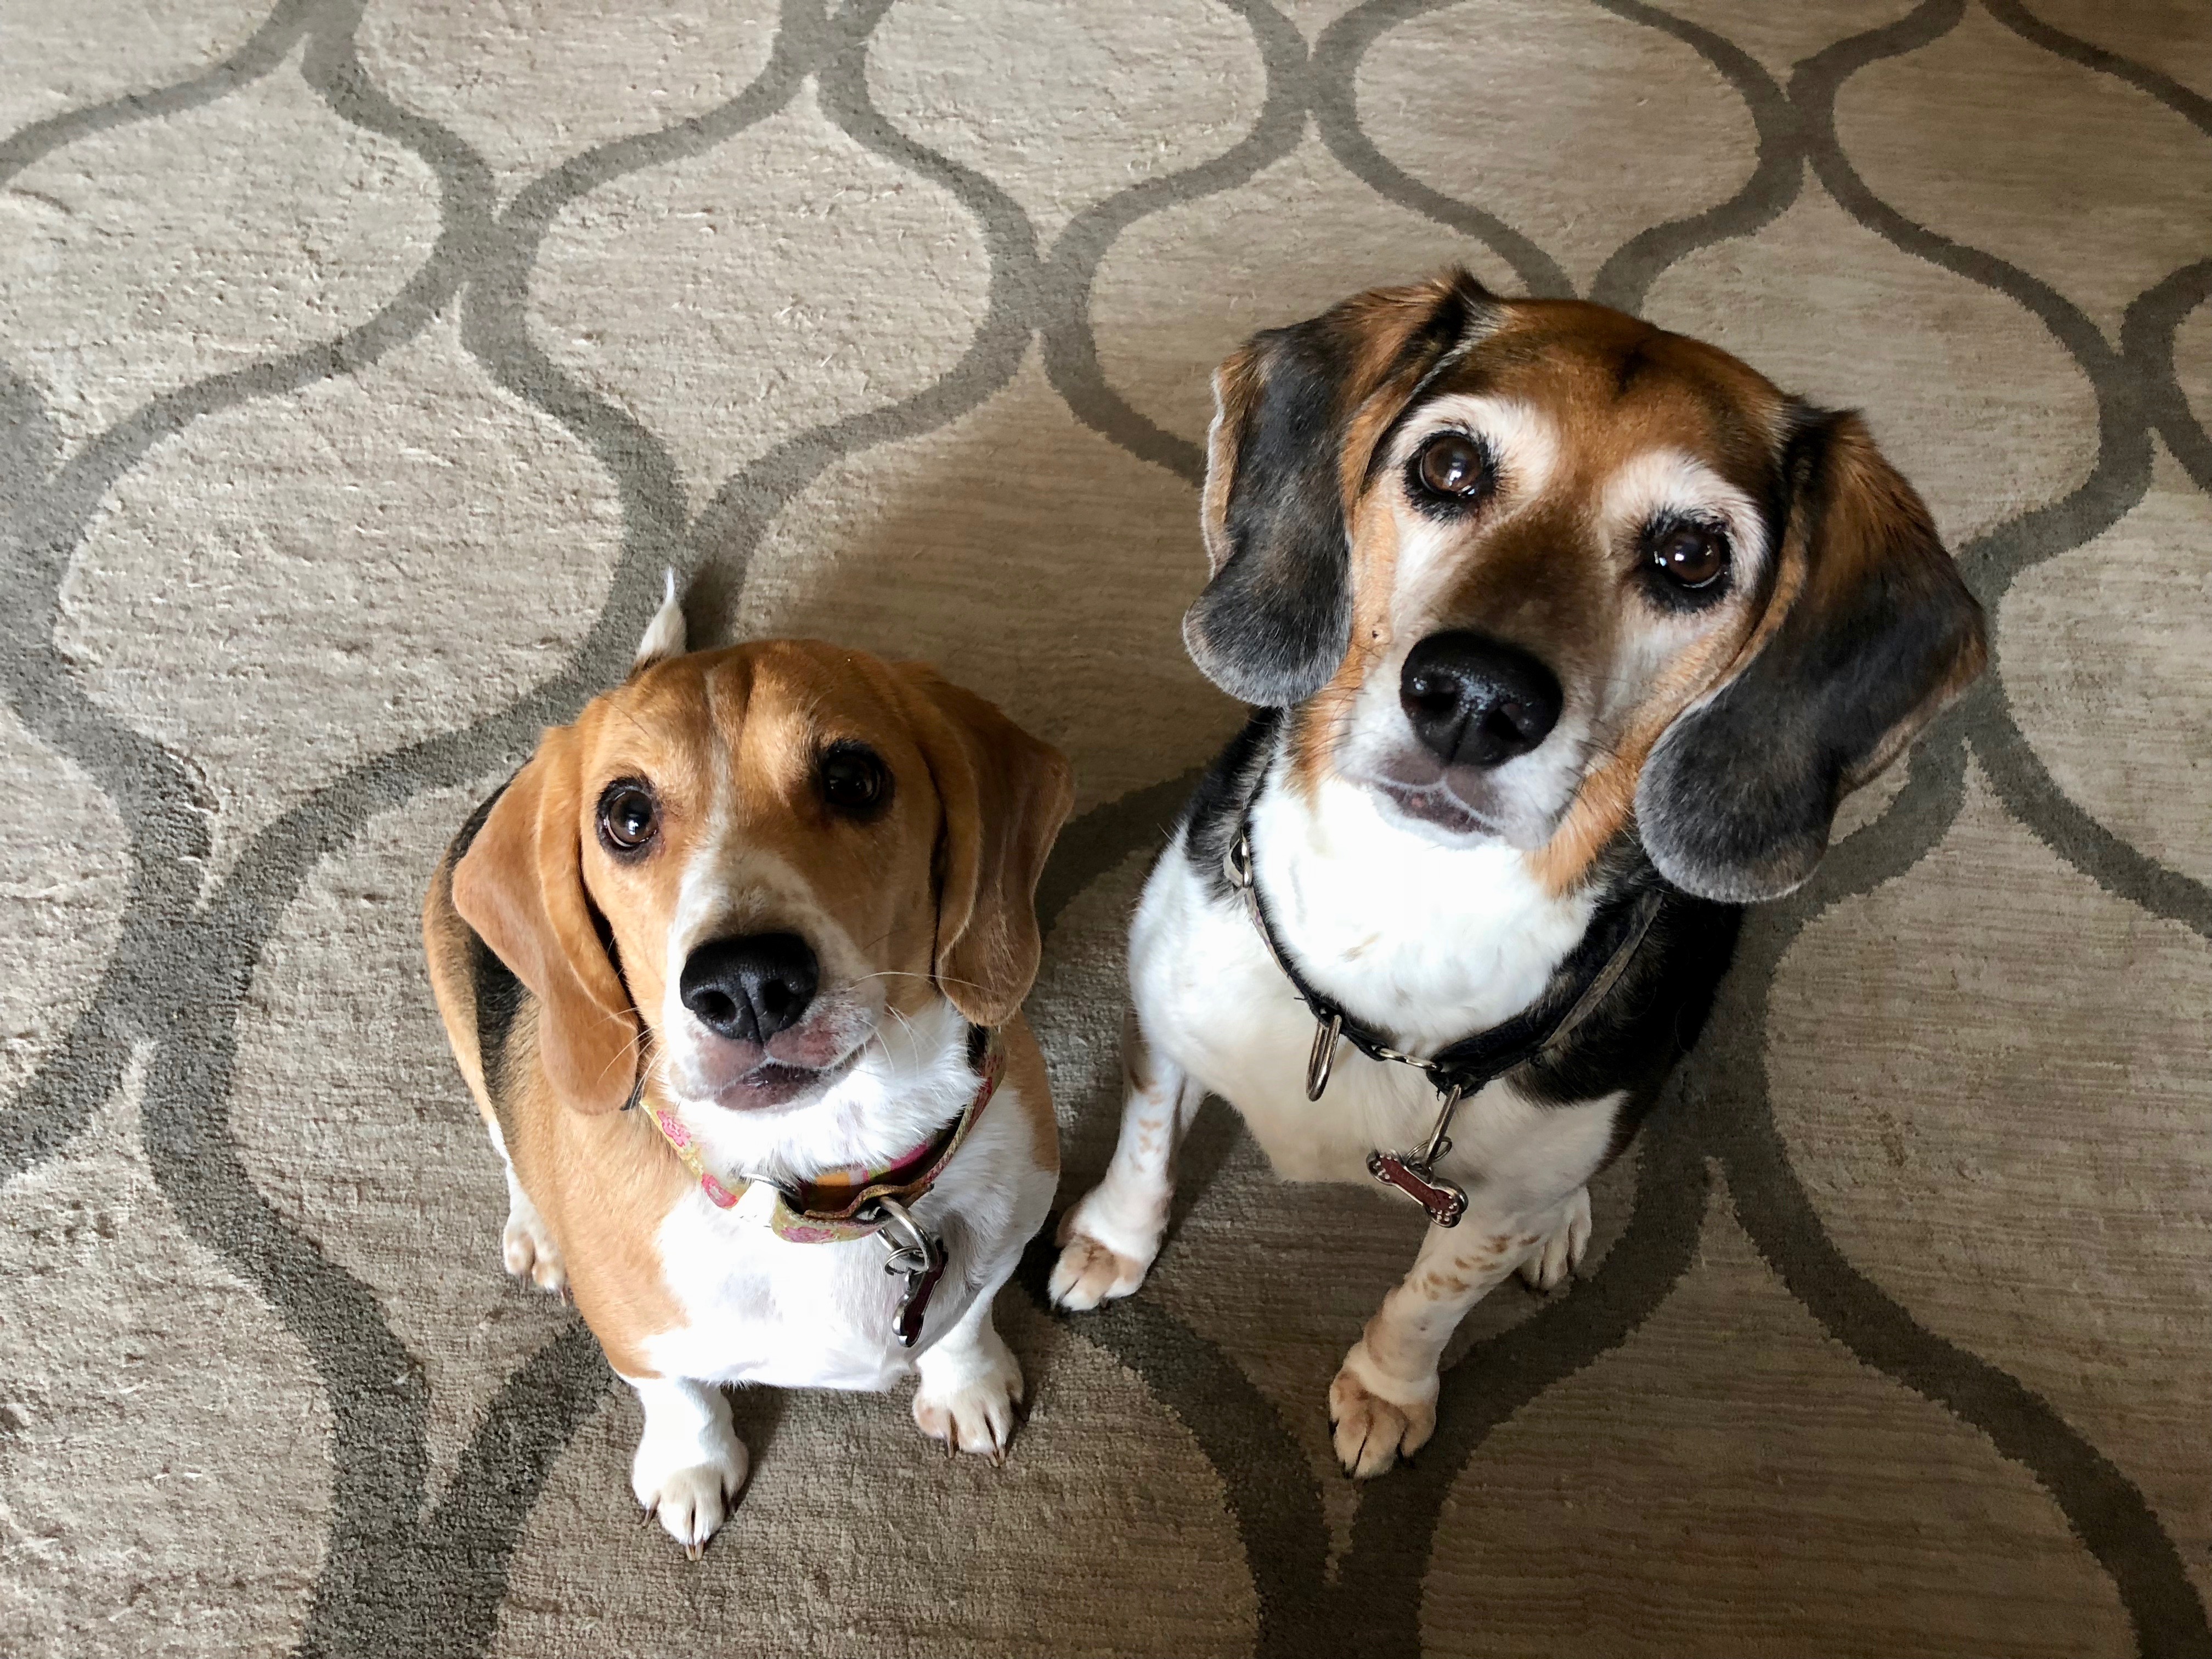 KikiEllieMay - Great Tips to Help a Beagle Overcome her Fear of the Vet